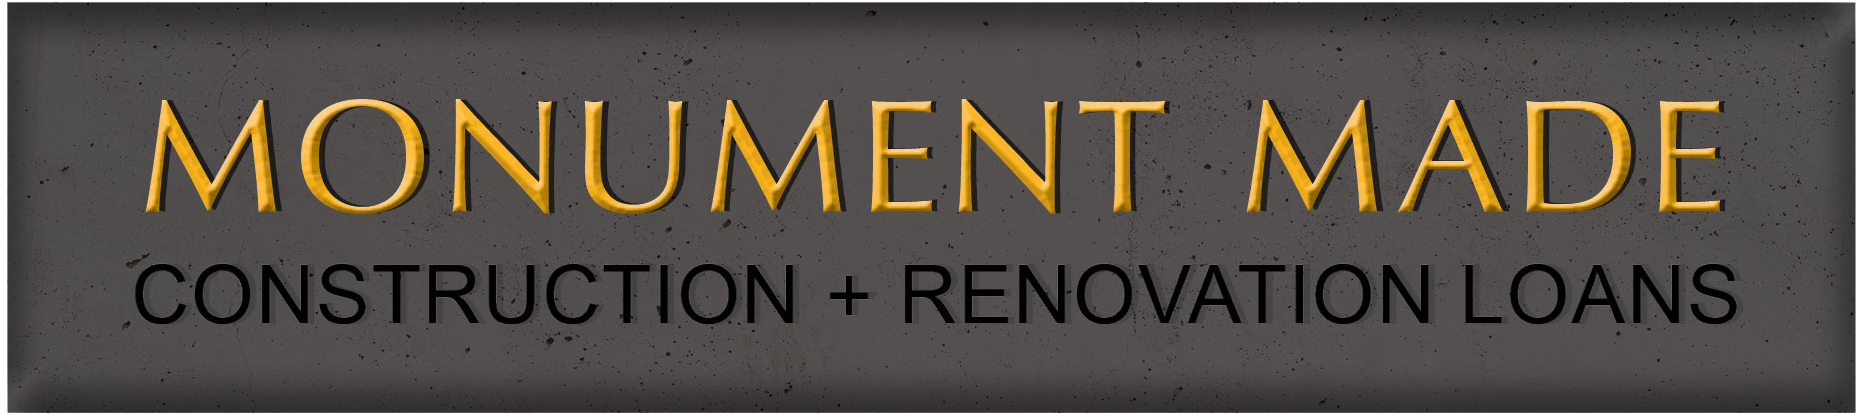 MonumentMade construction and renovation loan logo